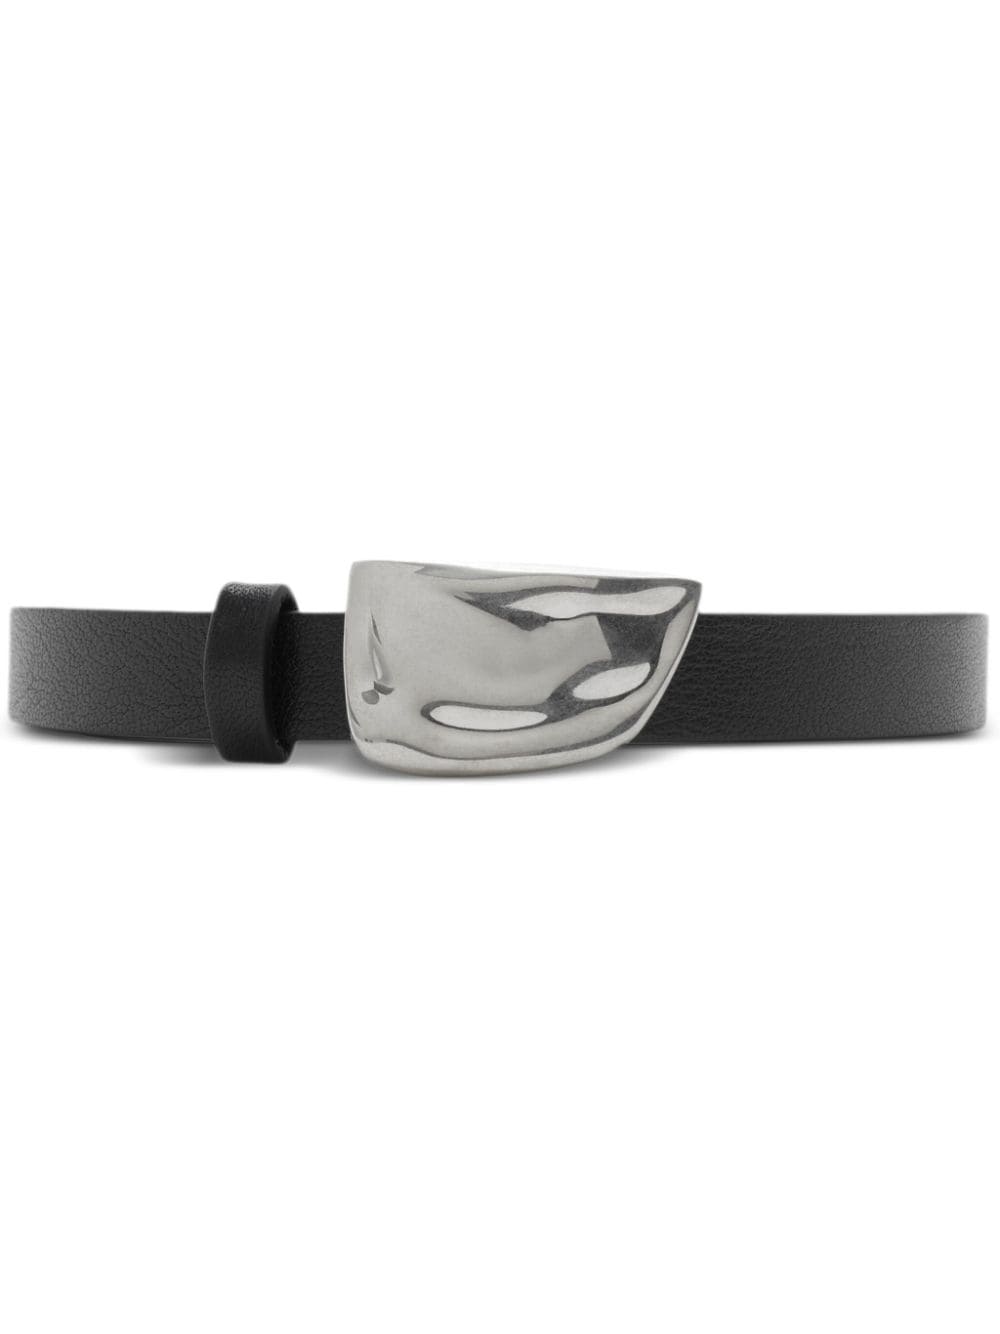 Image 1 of Burberry Shield leather belt